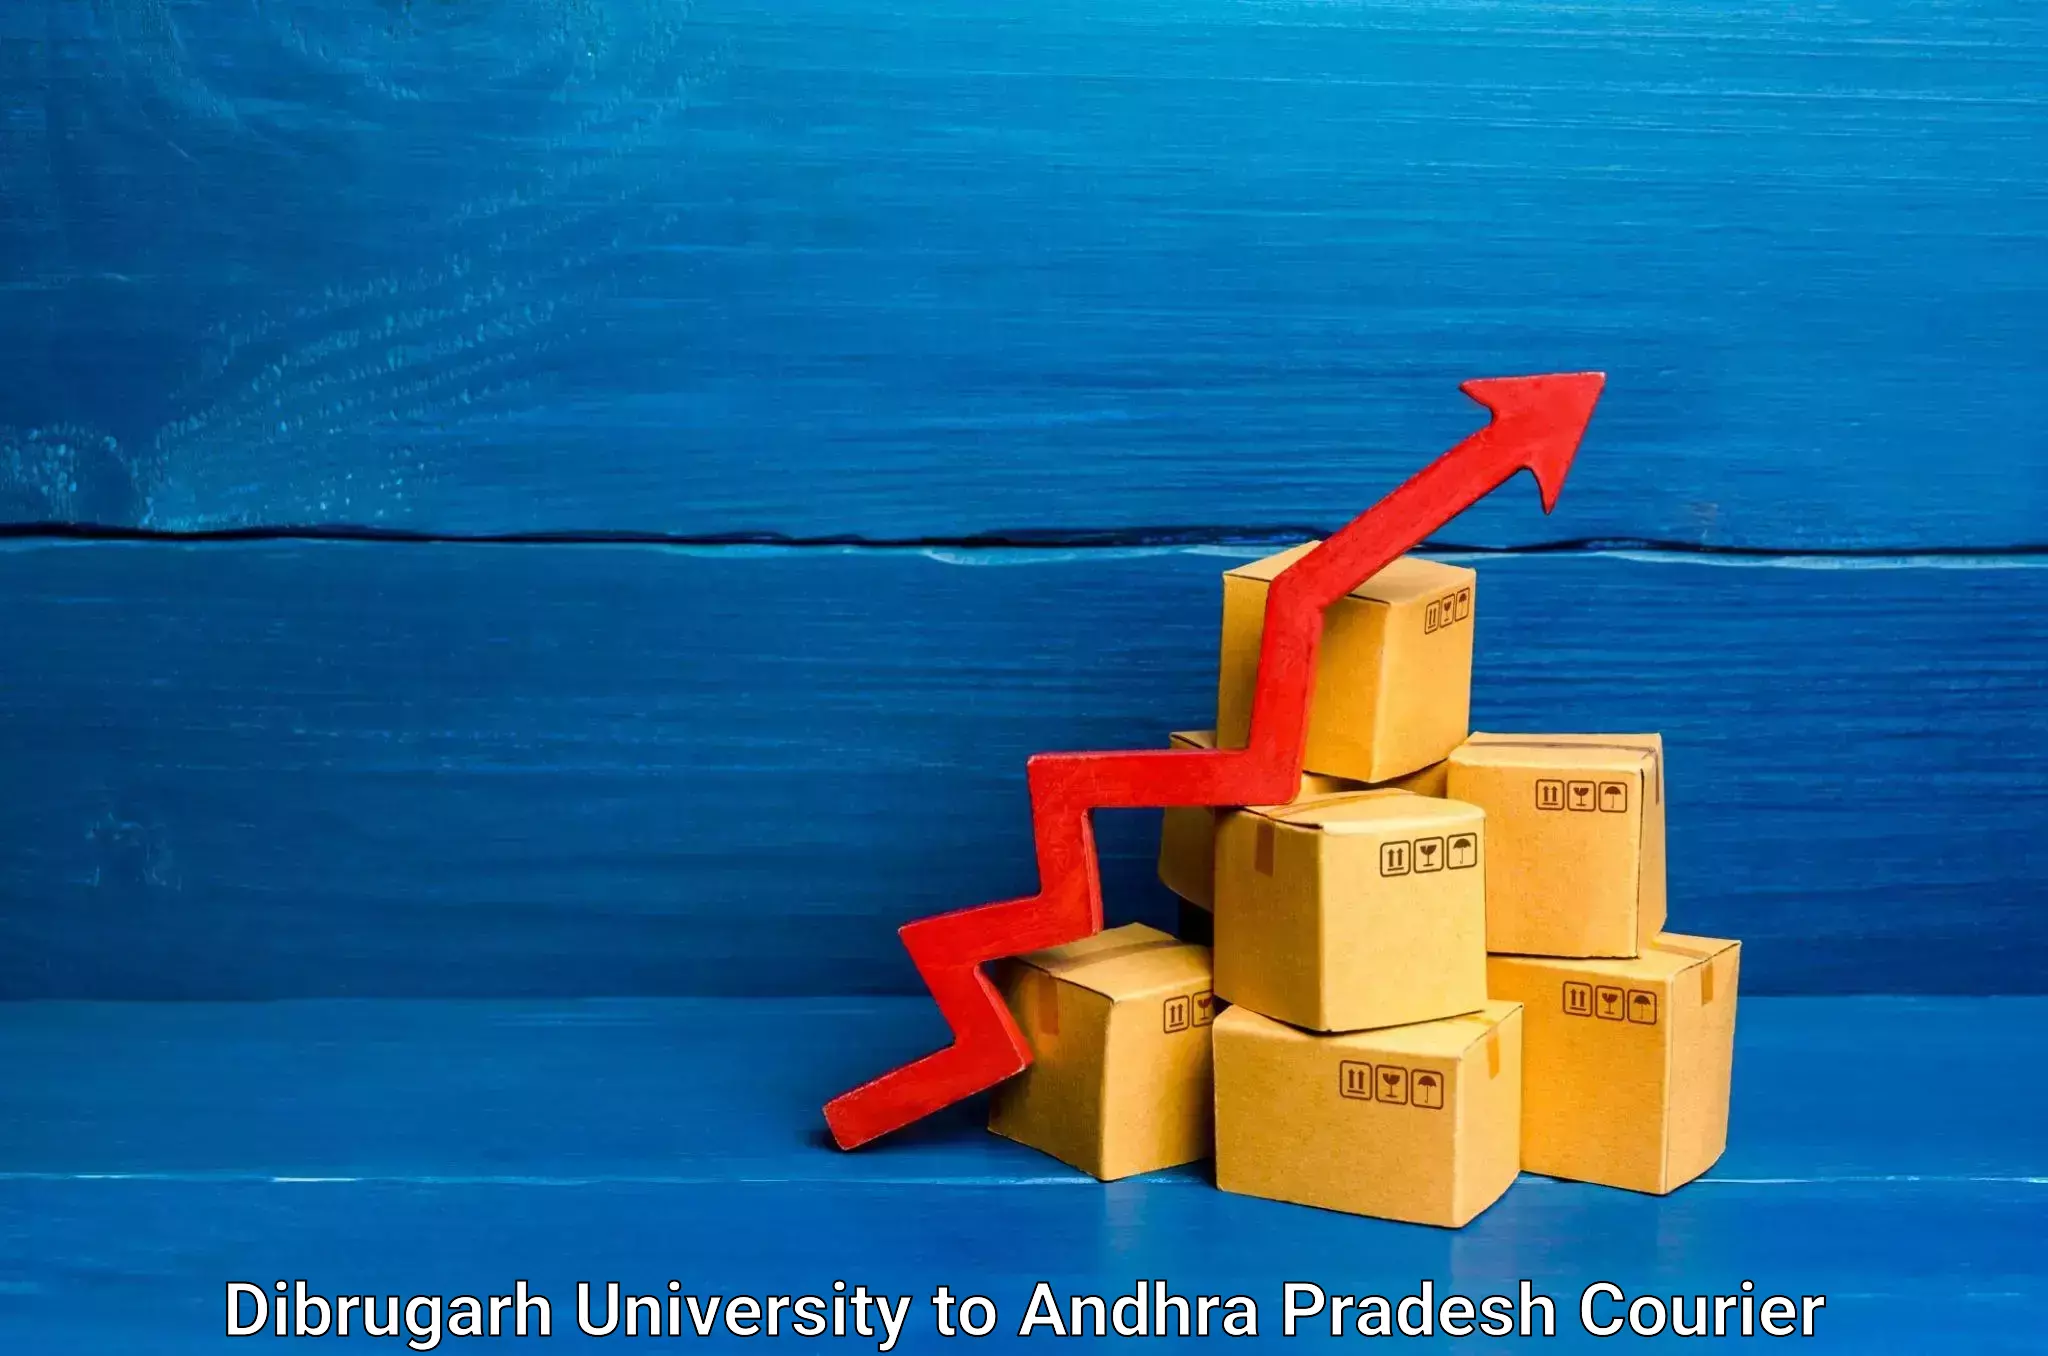 Express package delivery Dibrugarh University to Anantapur